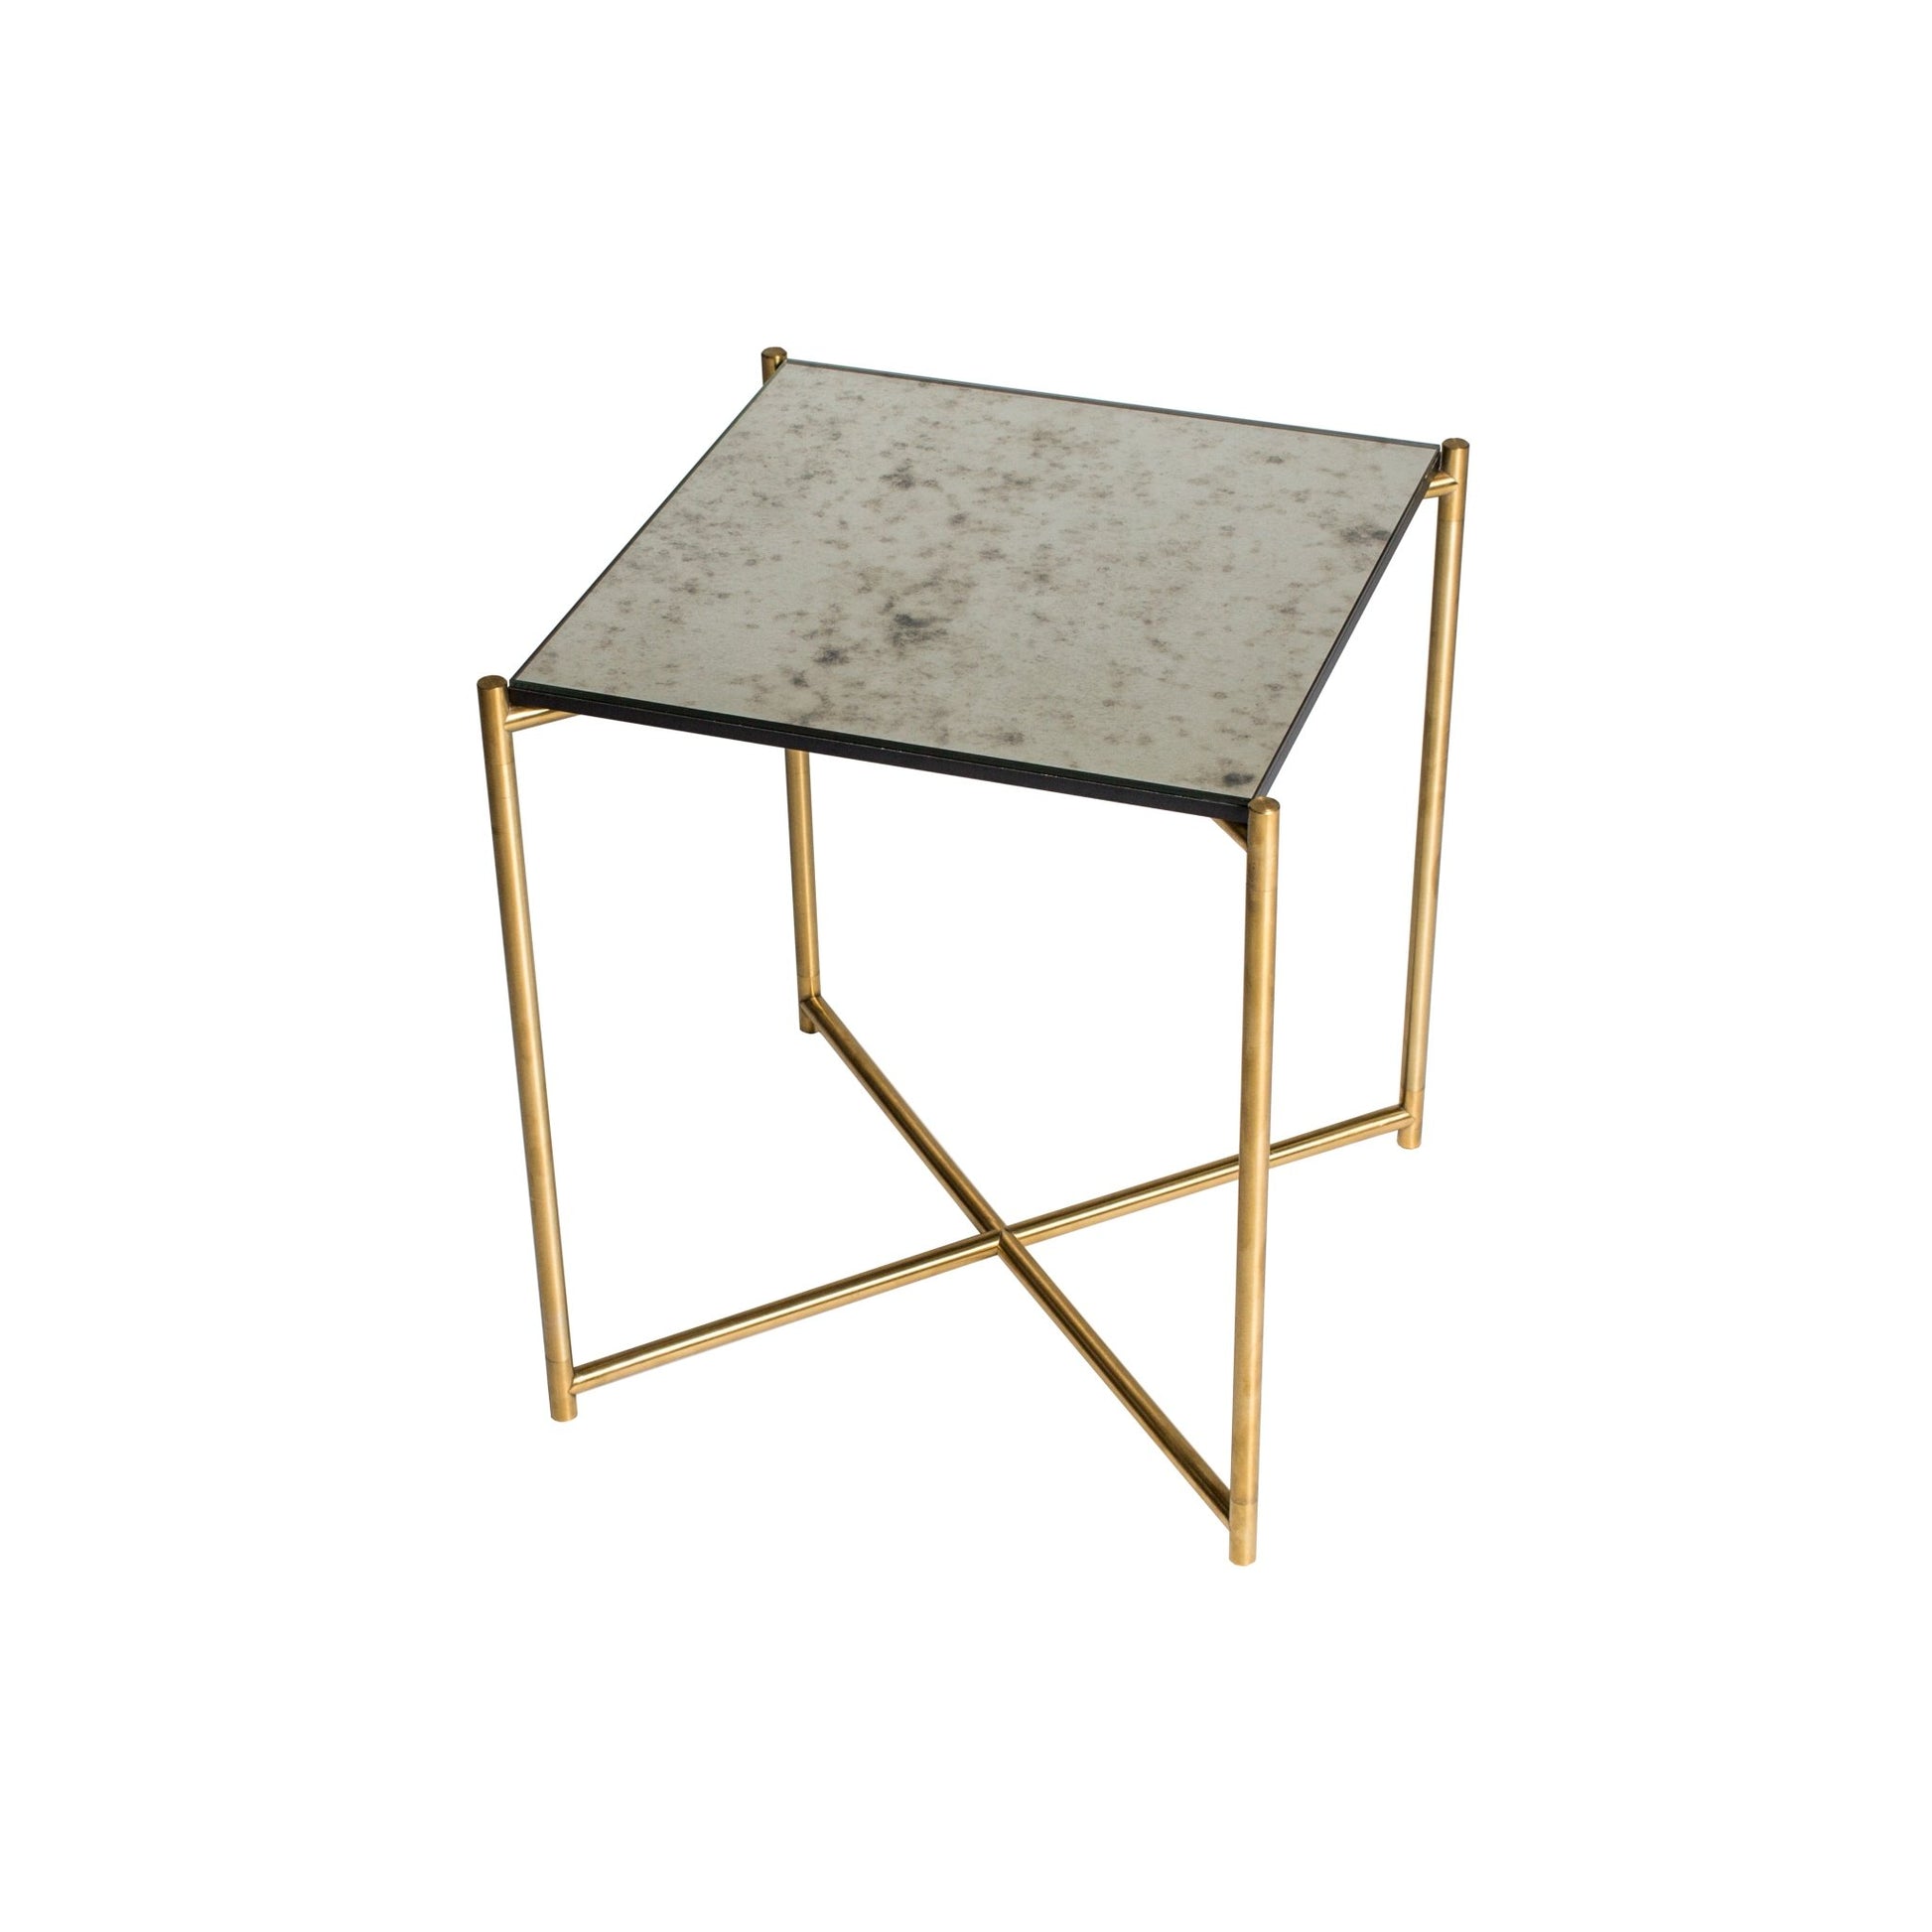 Iris Square Side Table - Antiqued Glass & Brass Frame